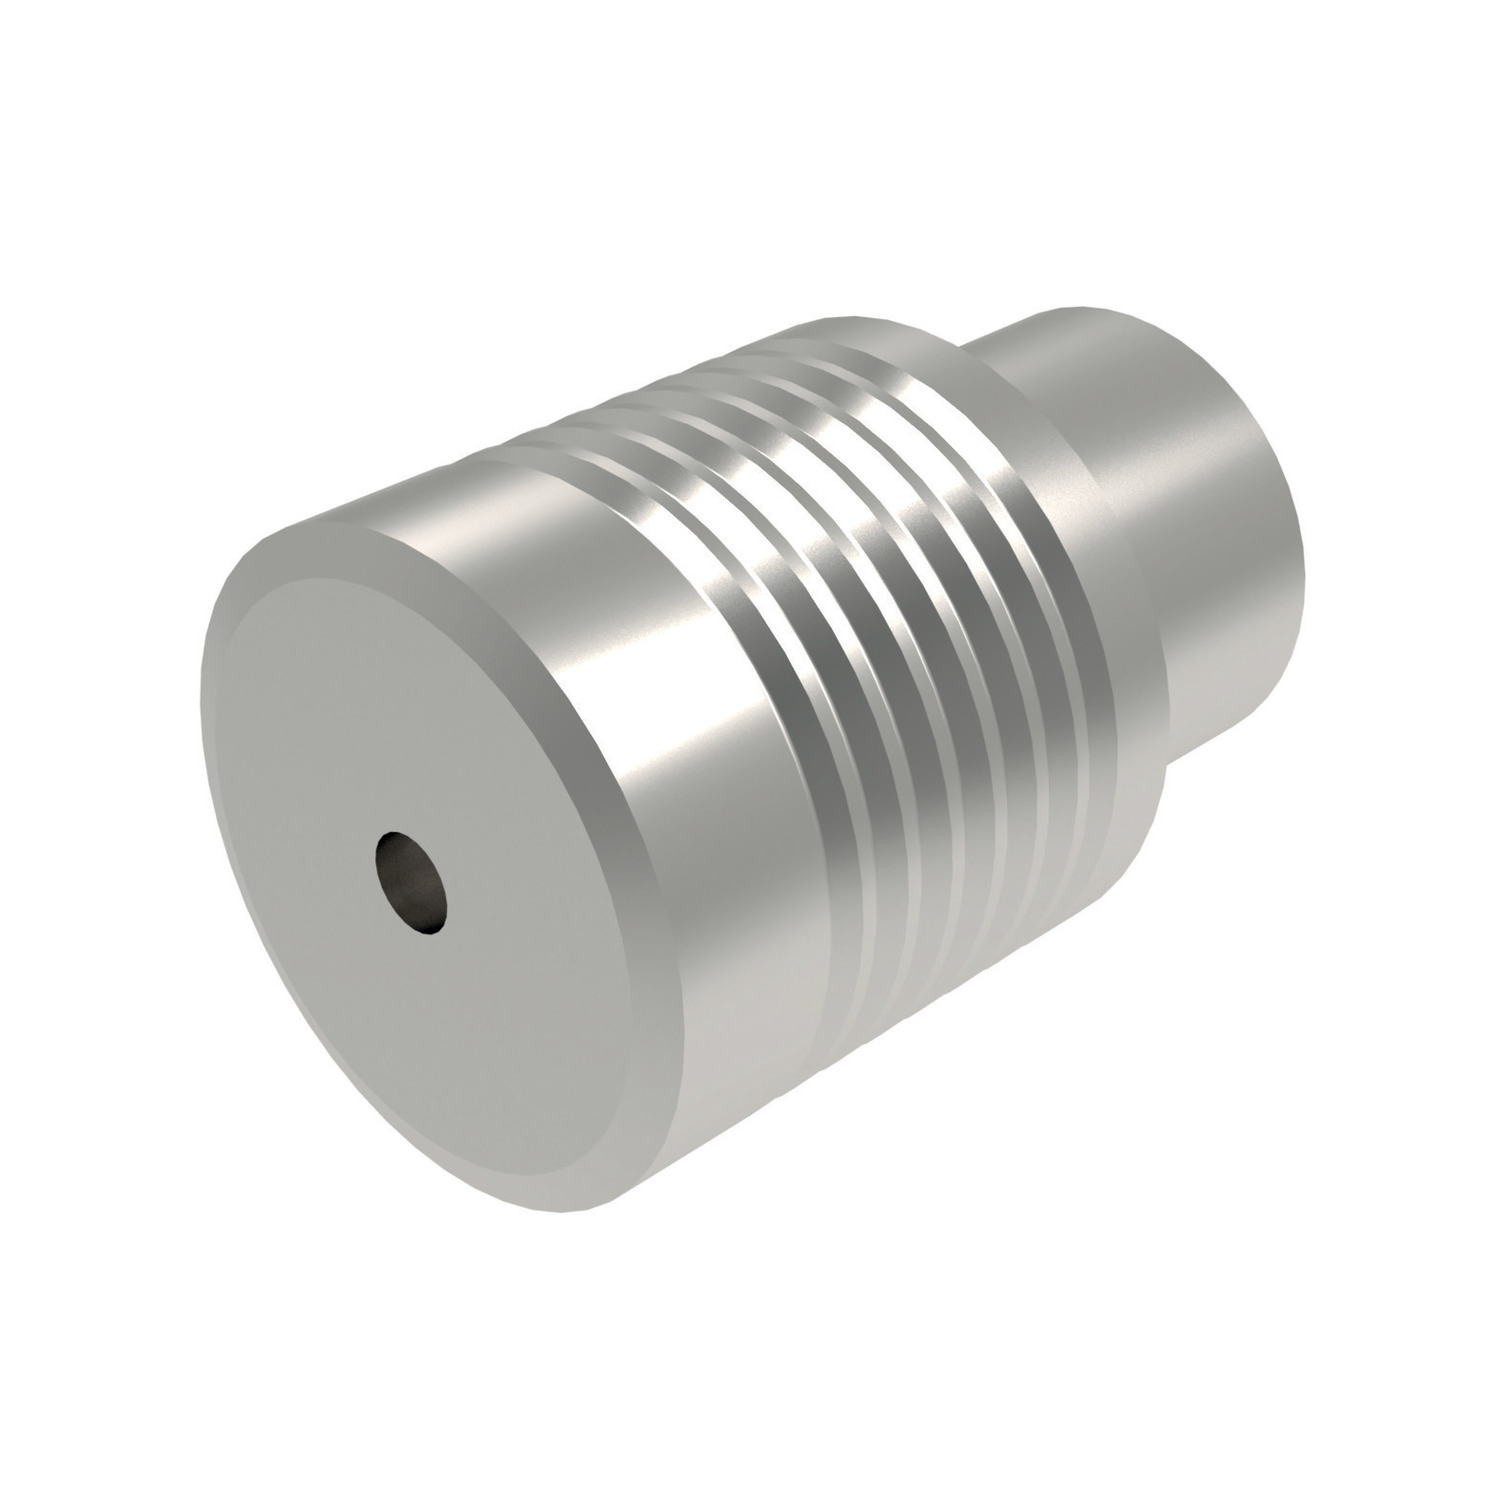 Expansion Restrictors Expansion plugs with through bore to reduce flow rates. Stainless steel.